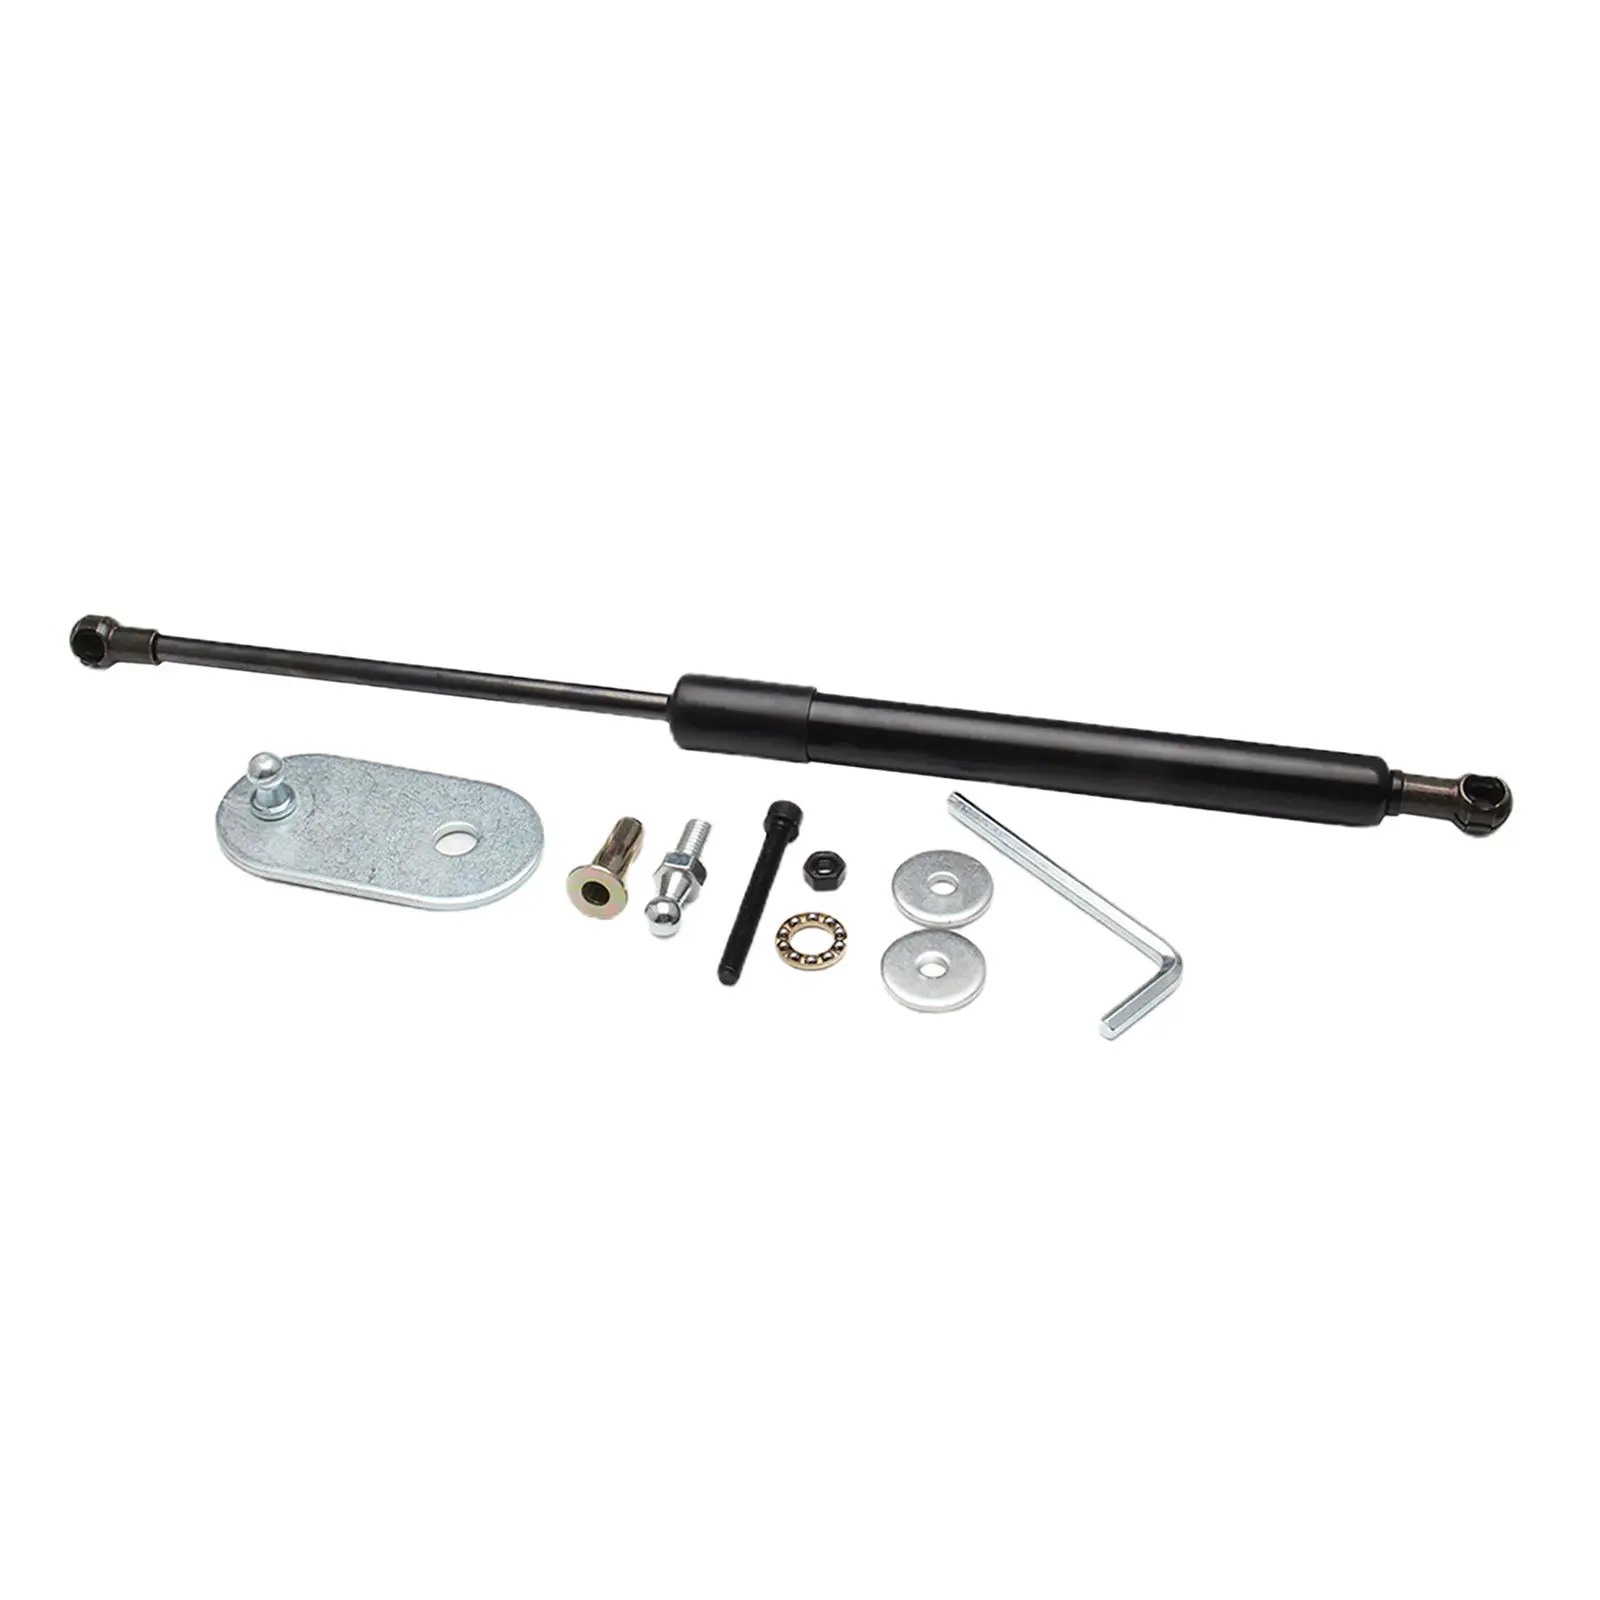 Durable Steel Tailgate Assist Spring Shock Struts Bar Lift Support for Ford F-150 04 05 06 07 08 09 10-14